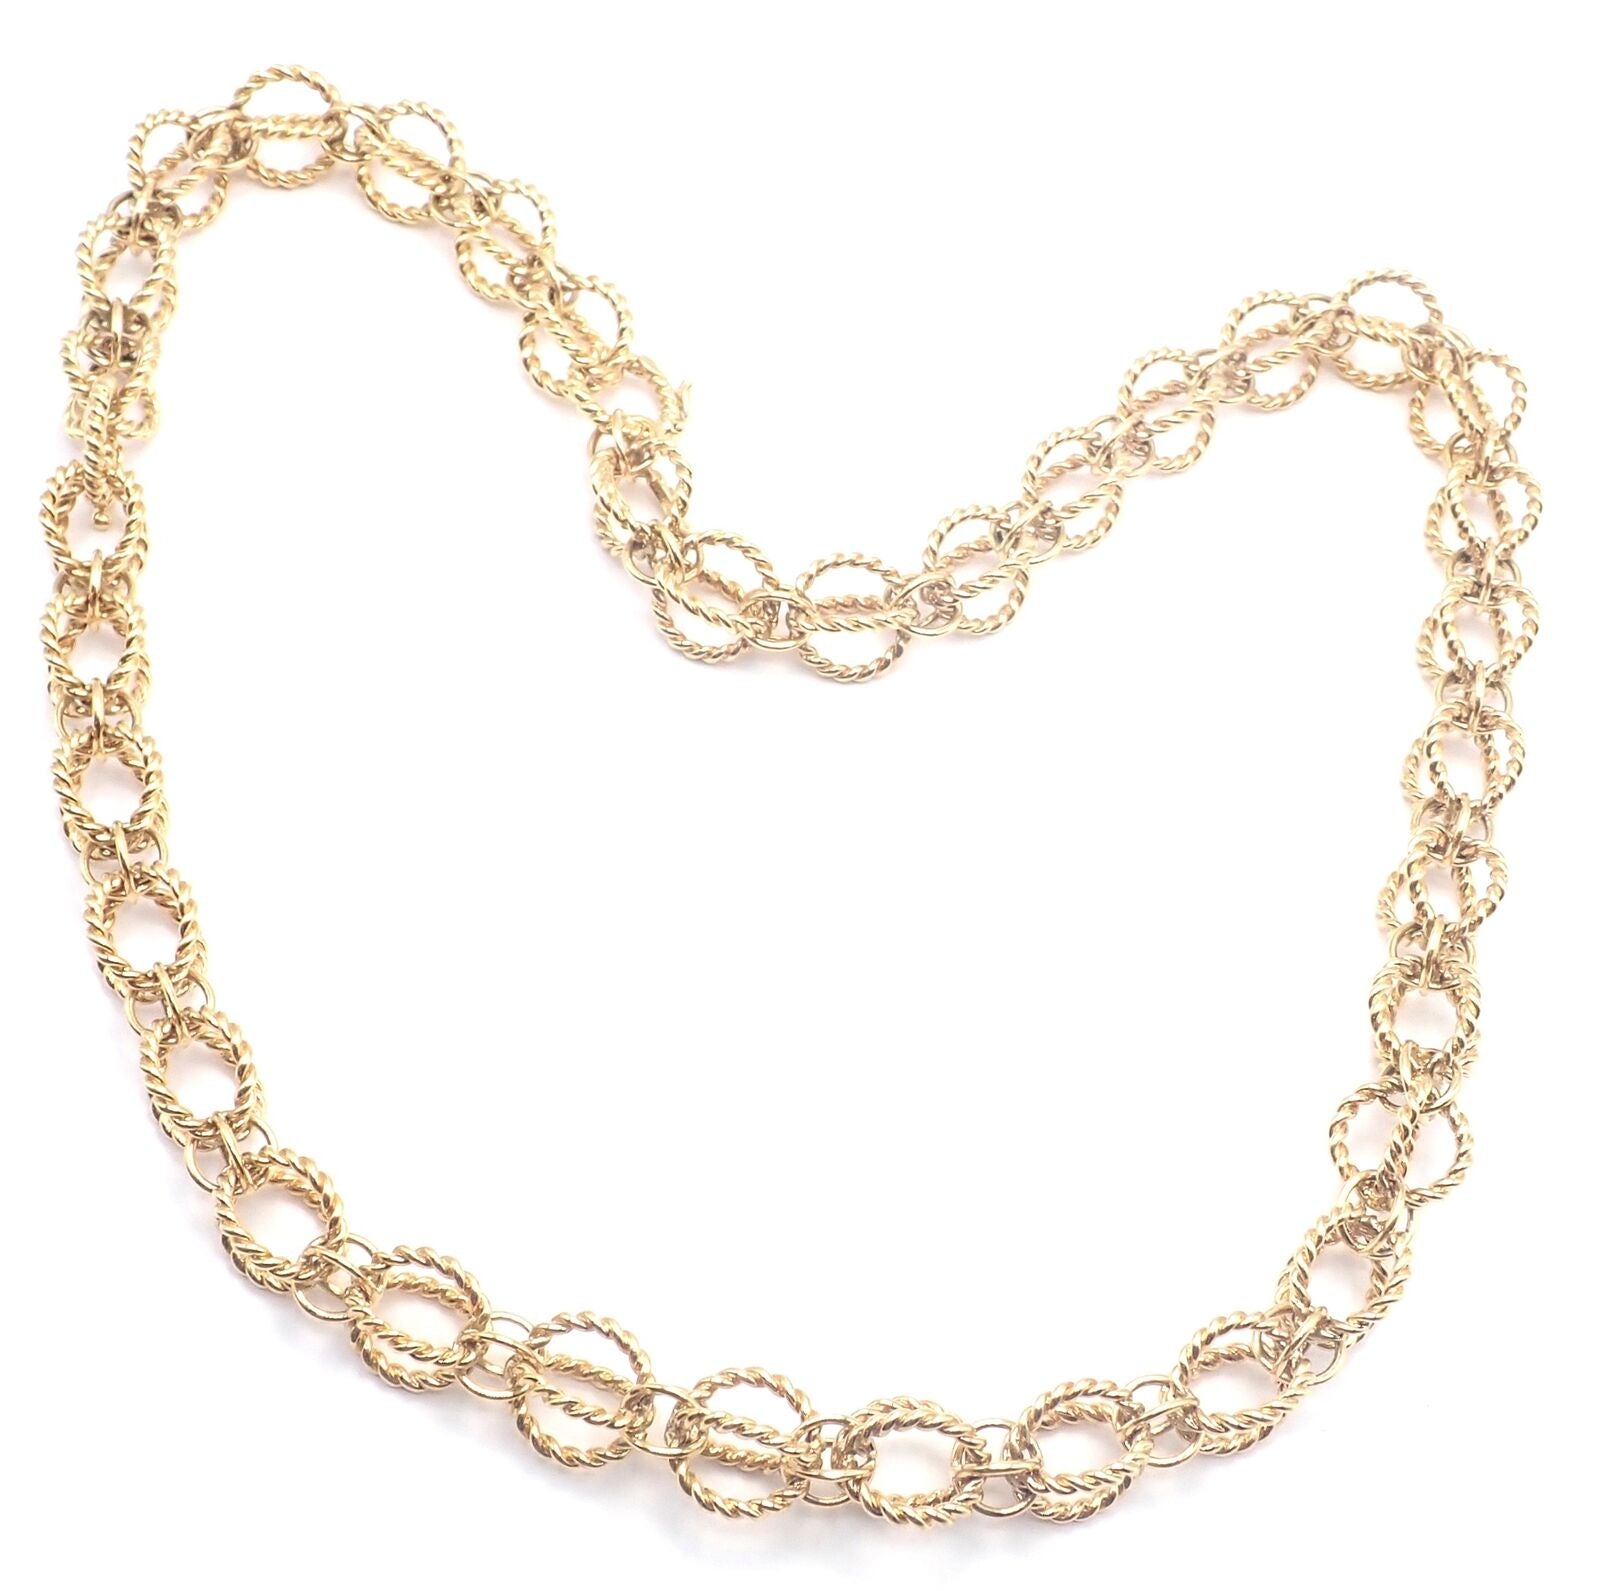 Tiffany & Co Schlumberger Circle Rope Necklace in 18K Gold